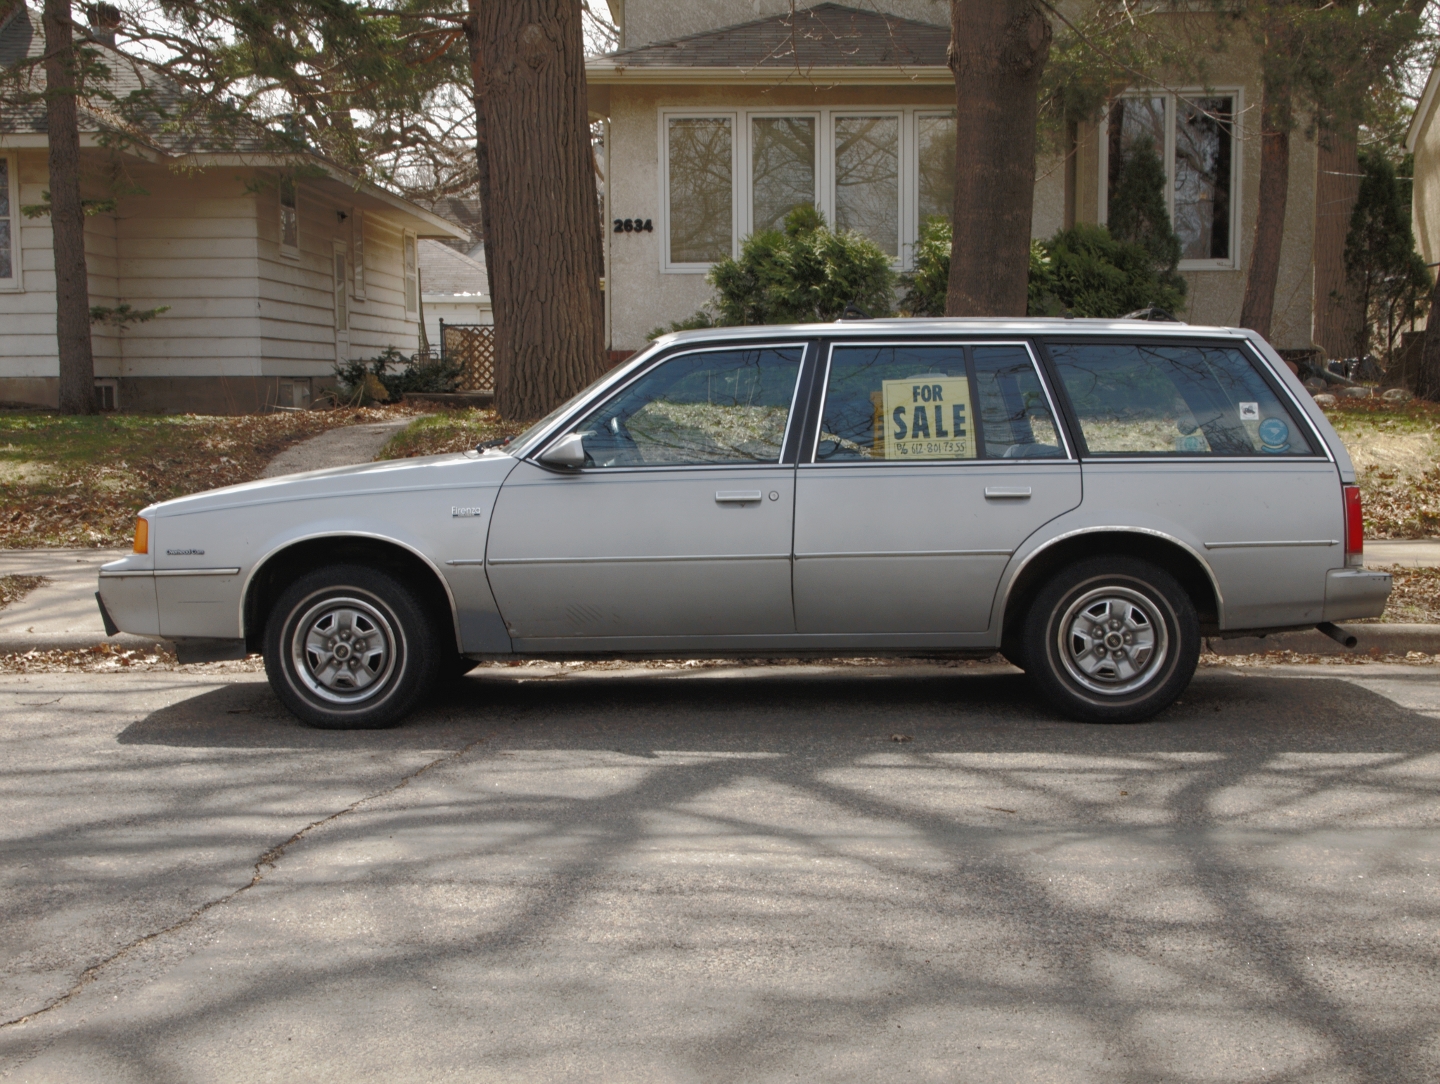 Oldsmobile Firenza Wagon (For Sale) | Flickr - Photo Sharing!